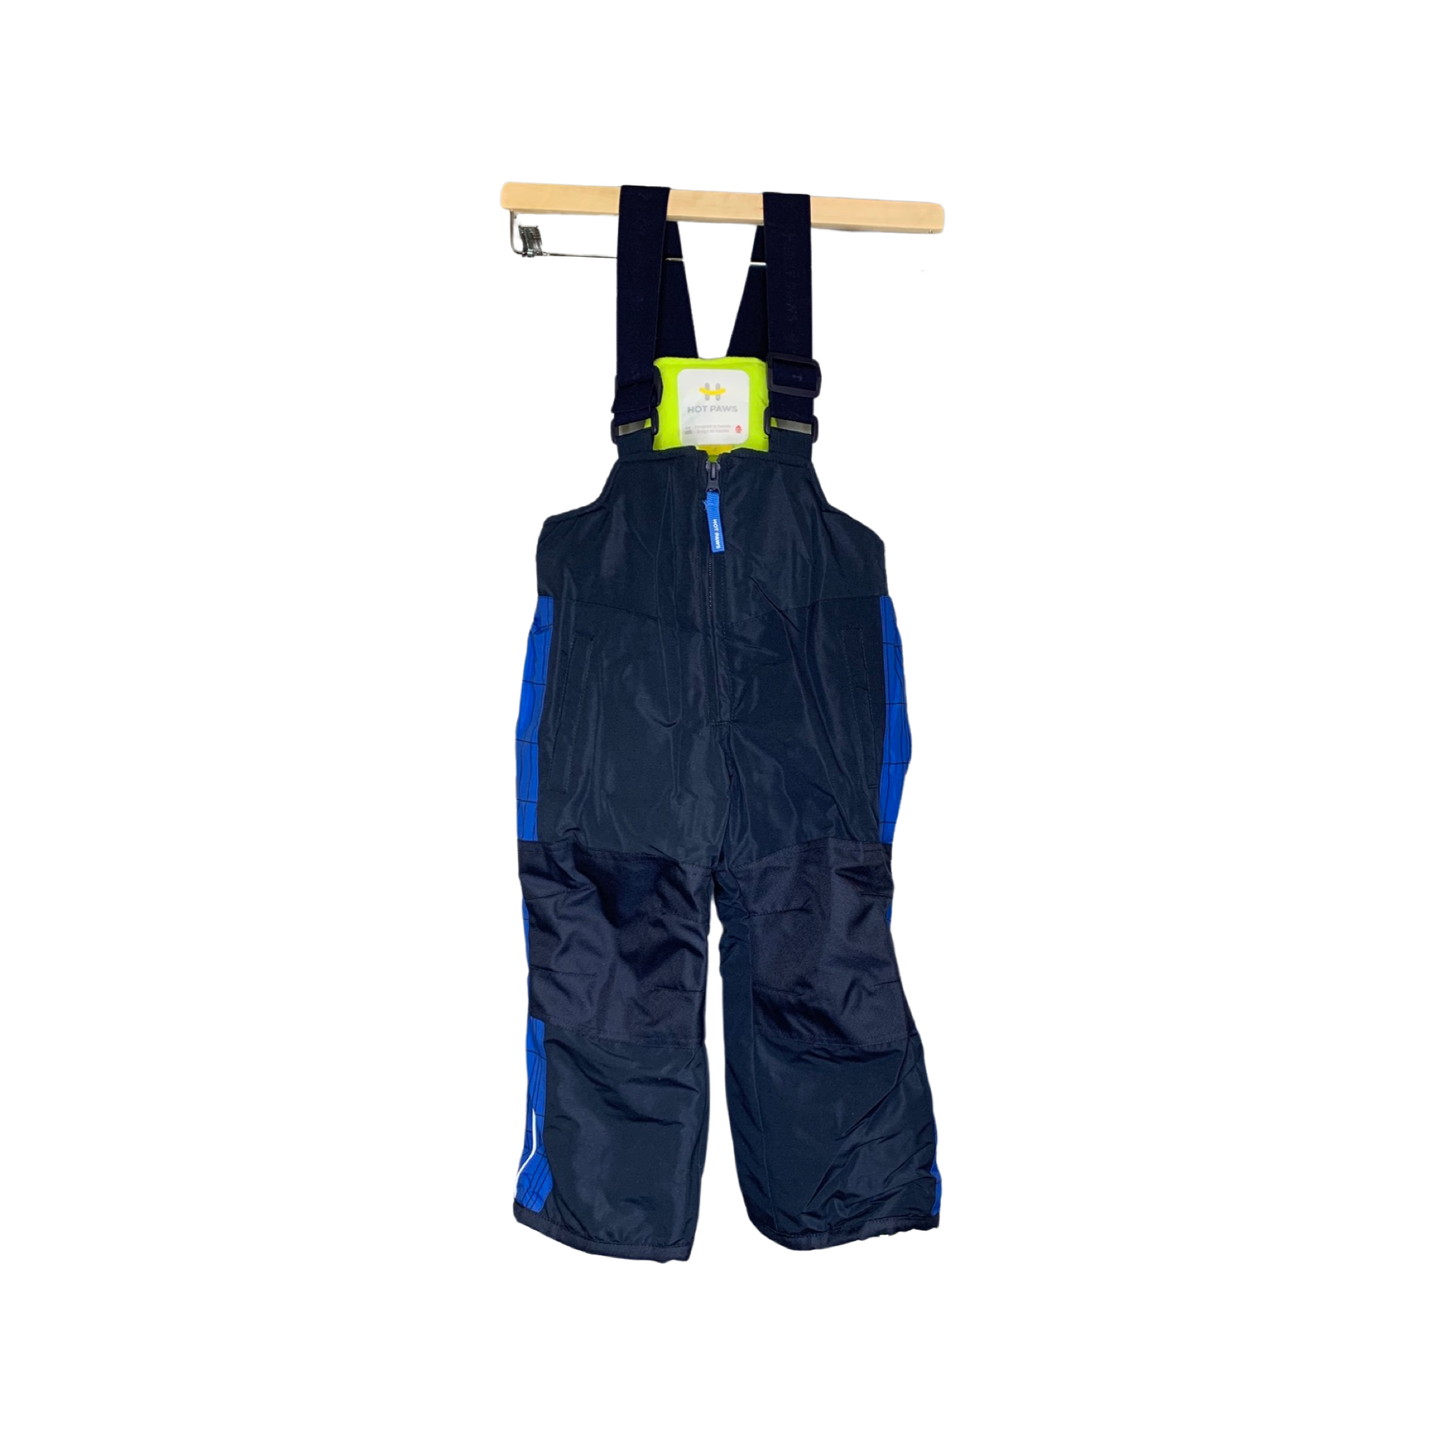 Hot Paws- Kids Two Piece Snow Suit (7469538967730)